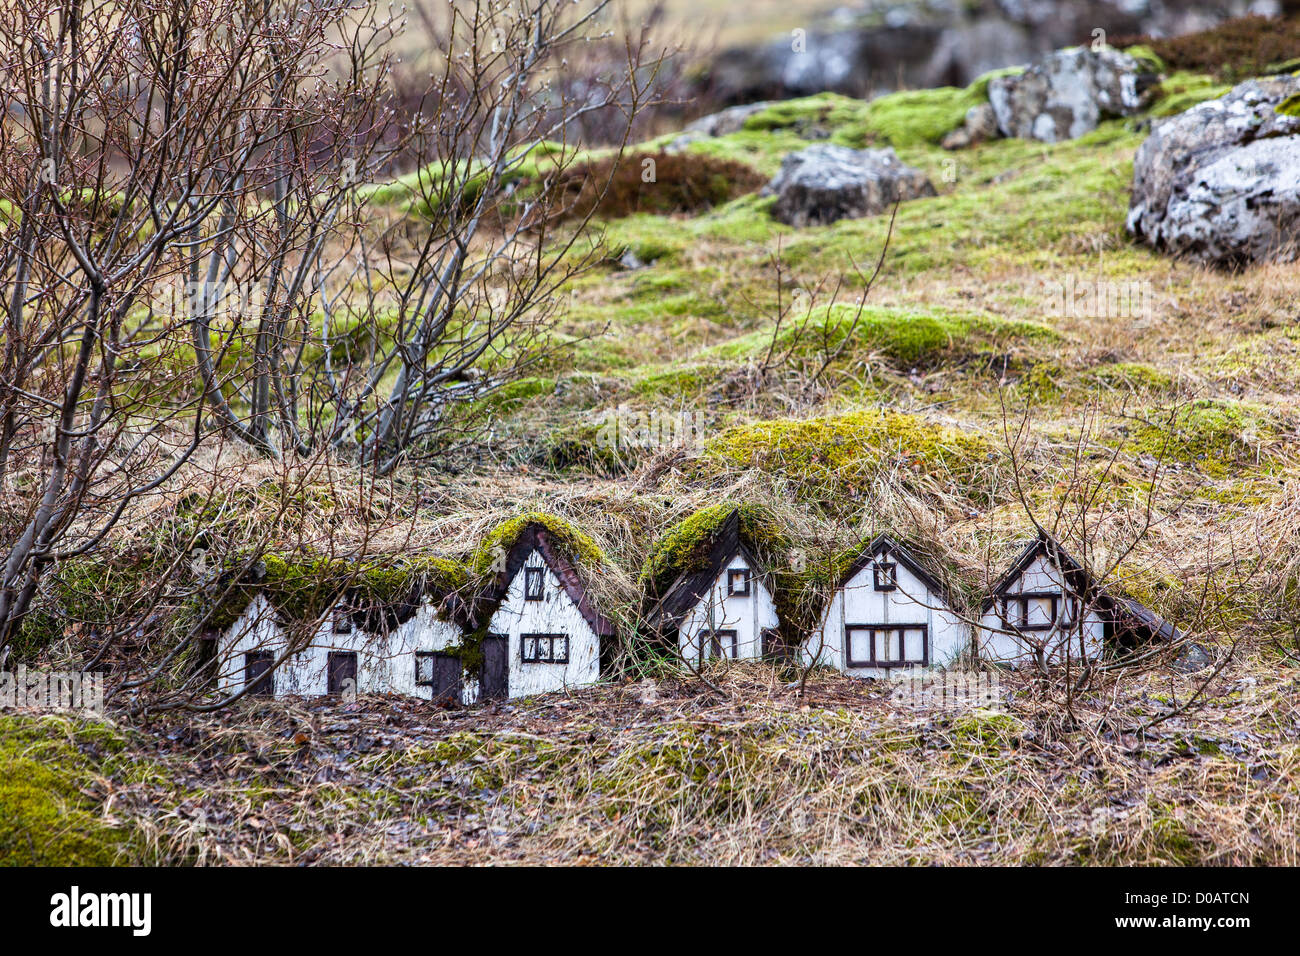 REPRODUCTION IN MINIATURE OF OLD FARMS OF PEAT WITH GRASS-COVERED ROOFS WESTERN ICELAND EUROPE Stock Photo